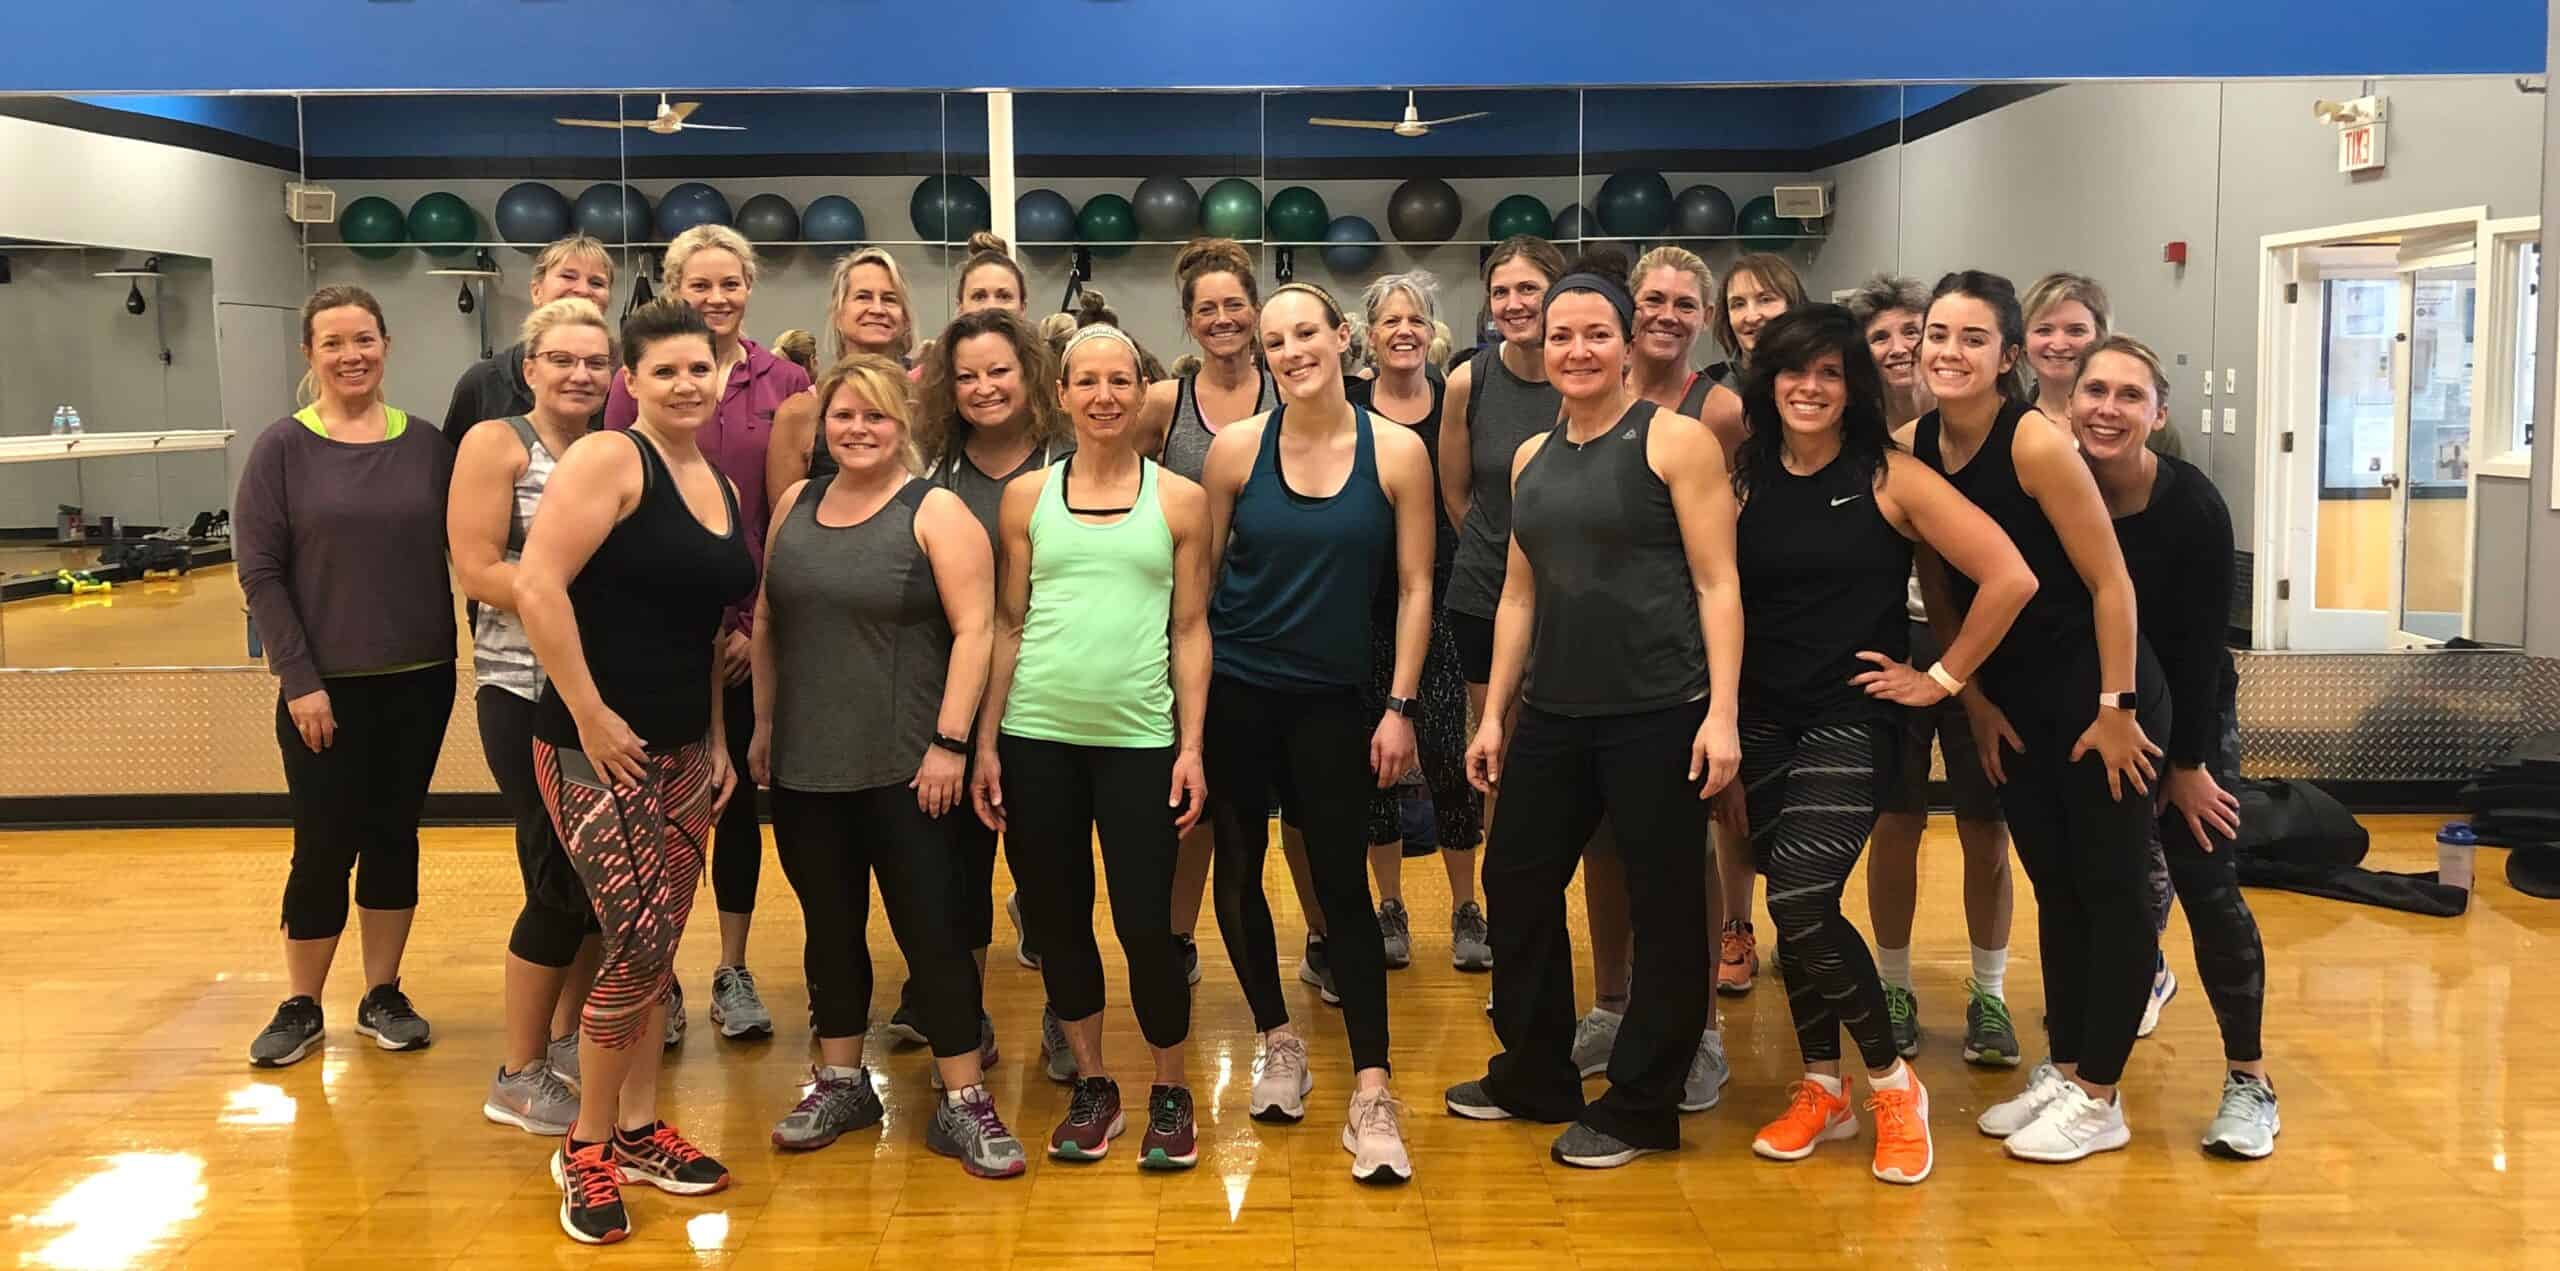 Miami Athletic Club Group Fitness class group of women smiling